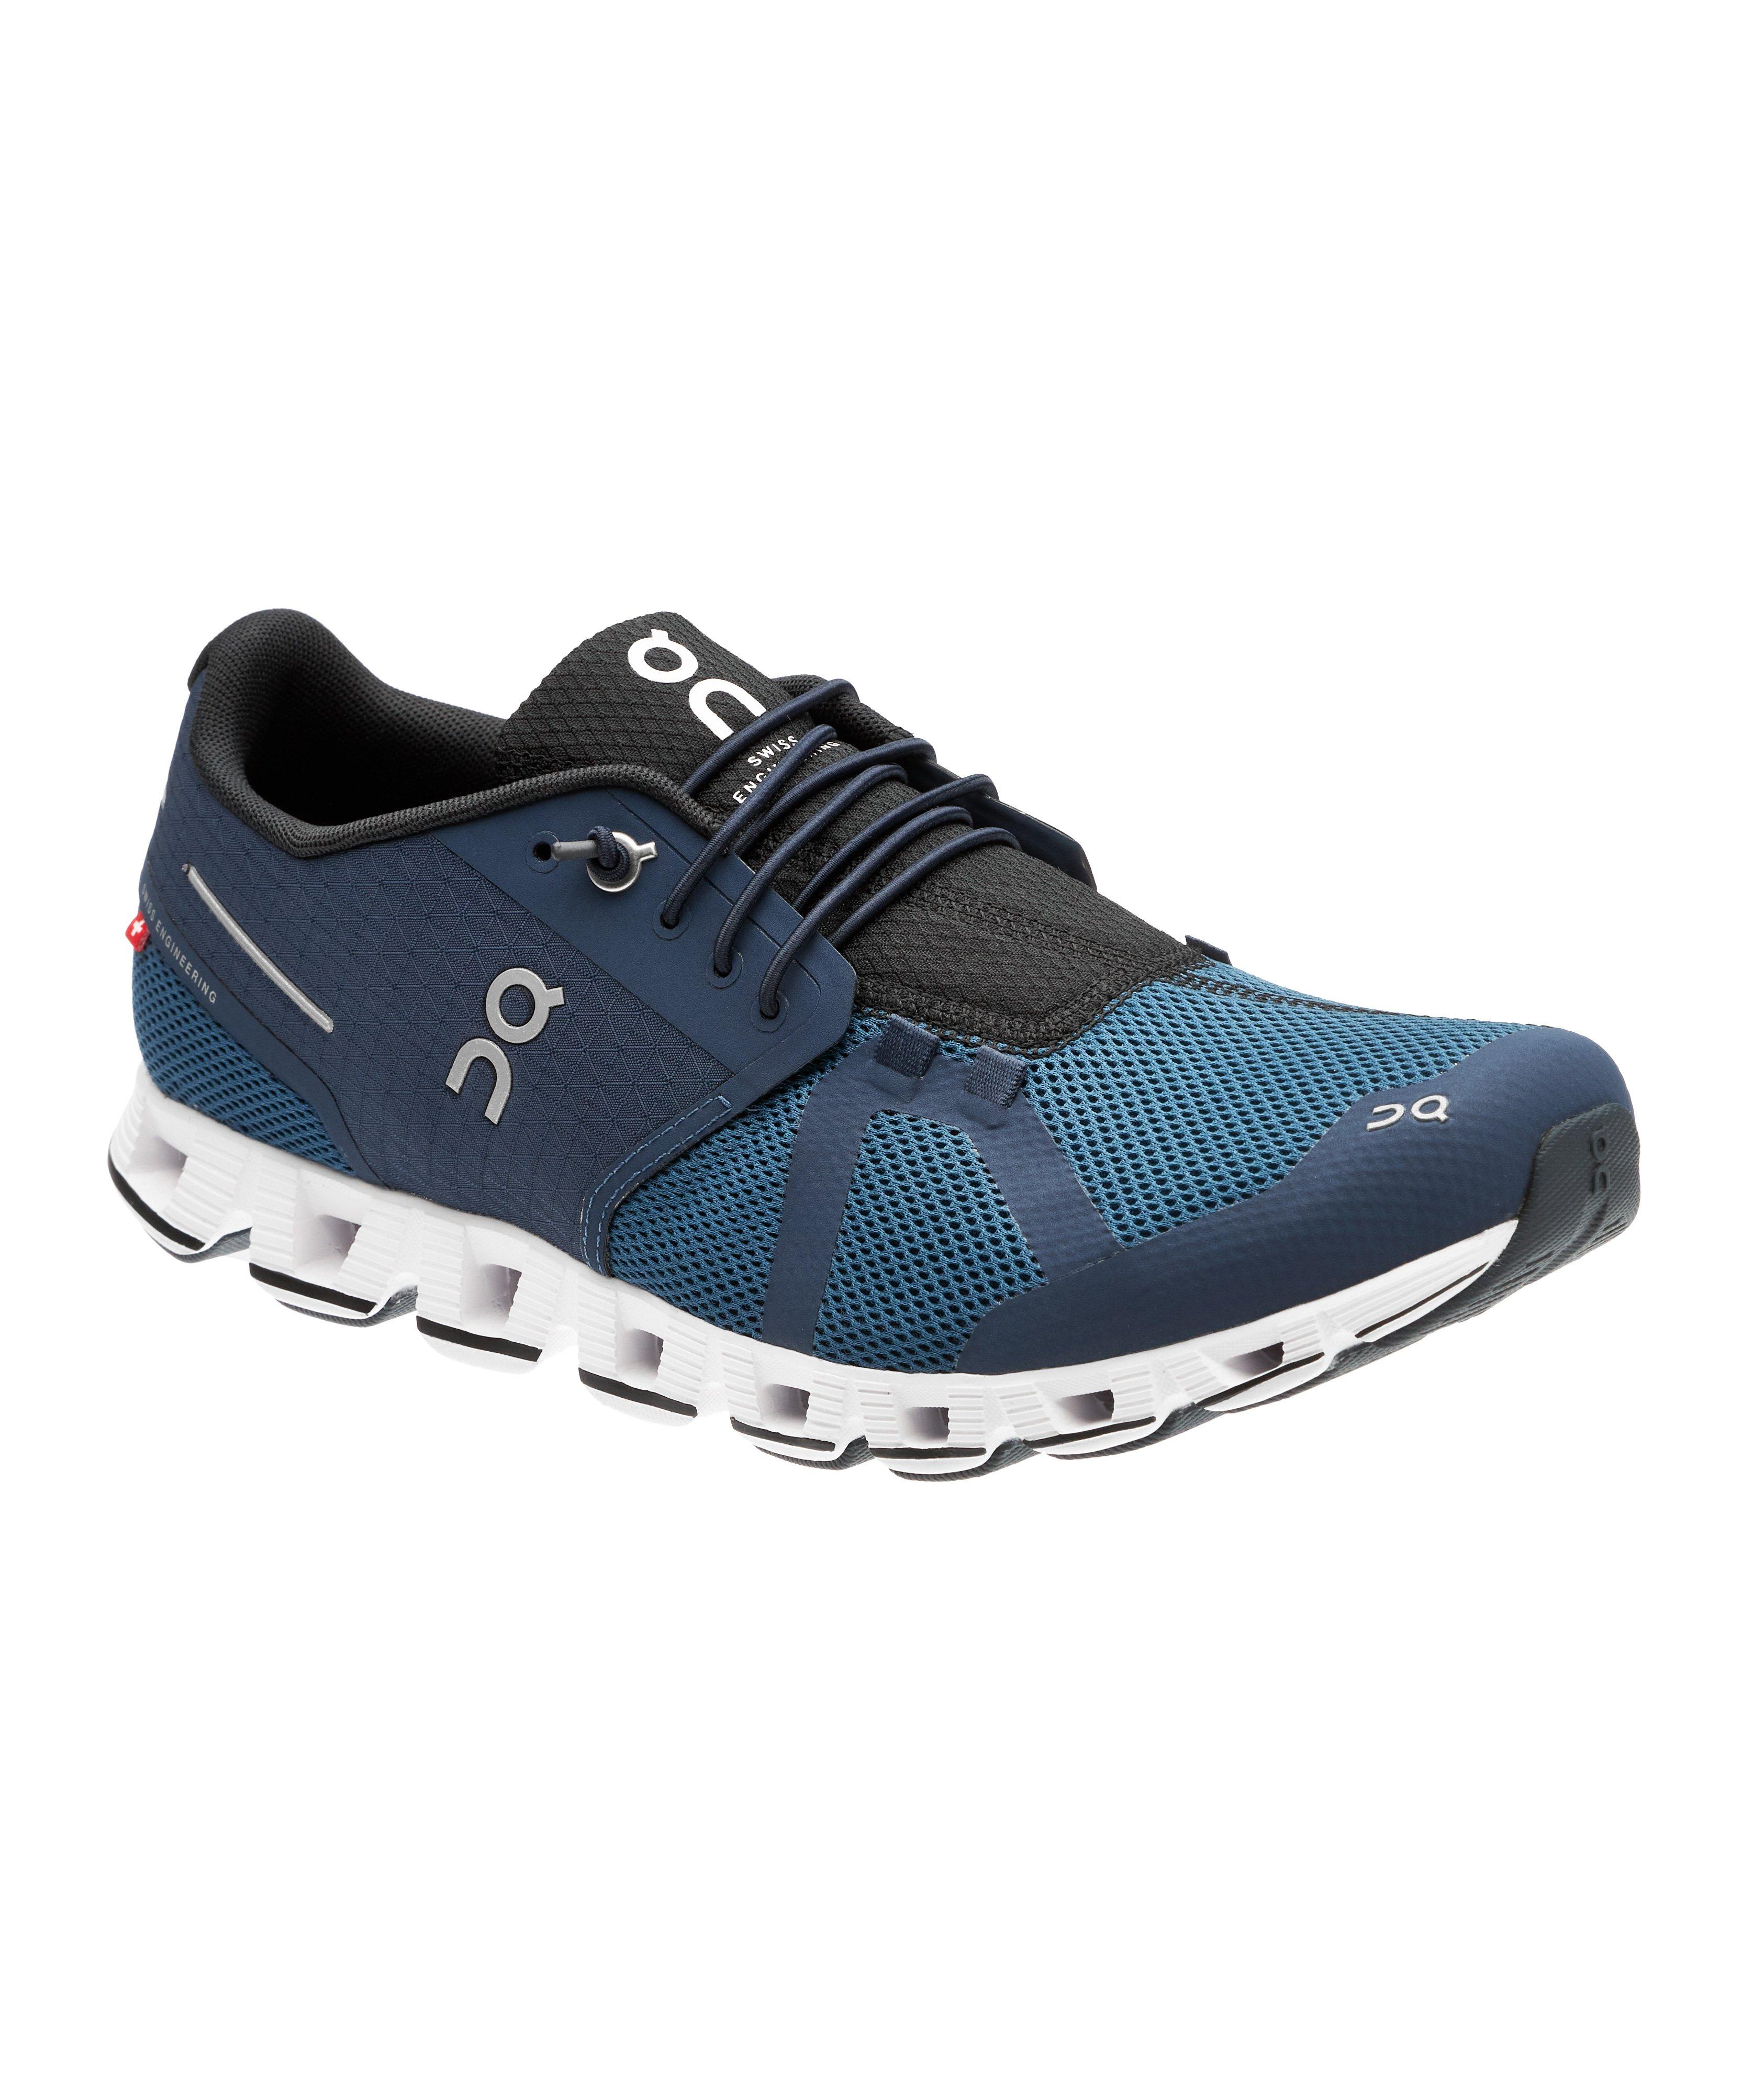 Cloud Running Shoes image 0